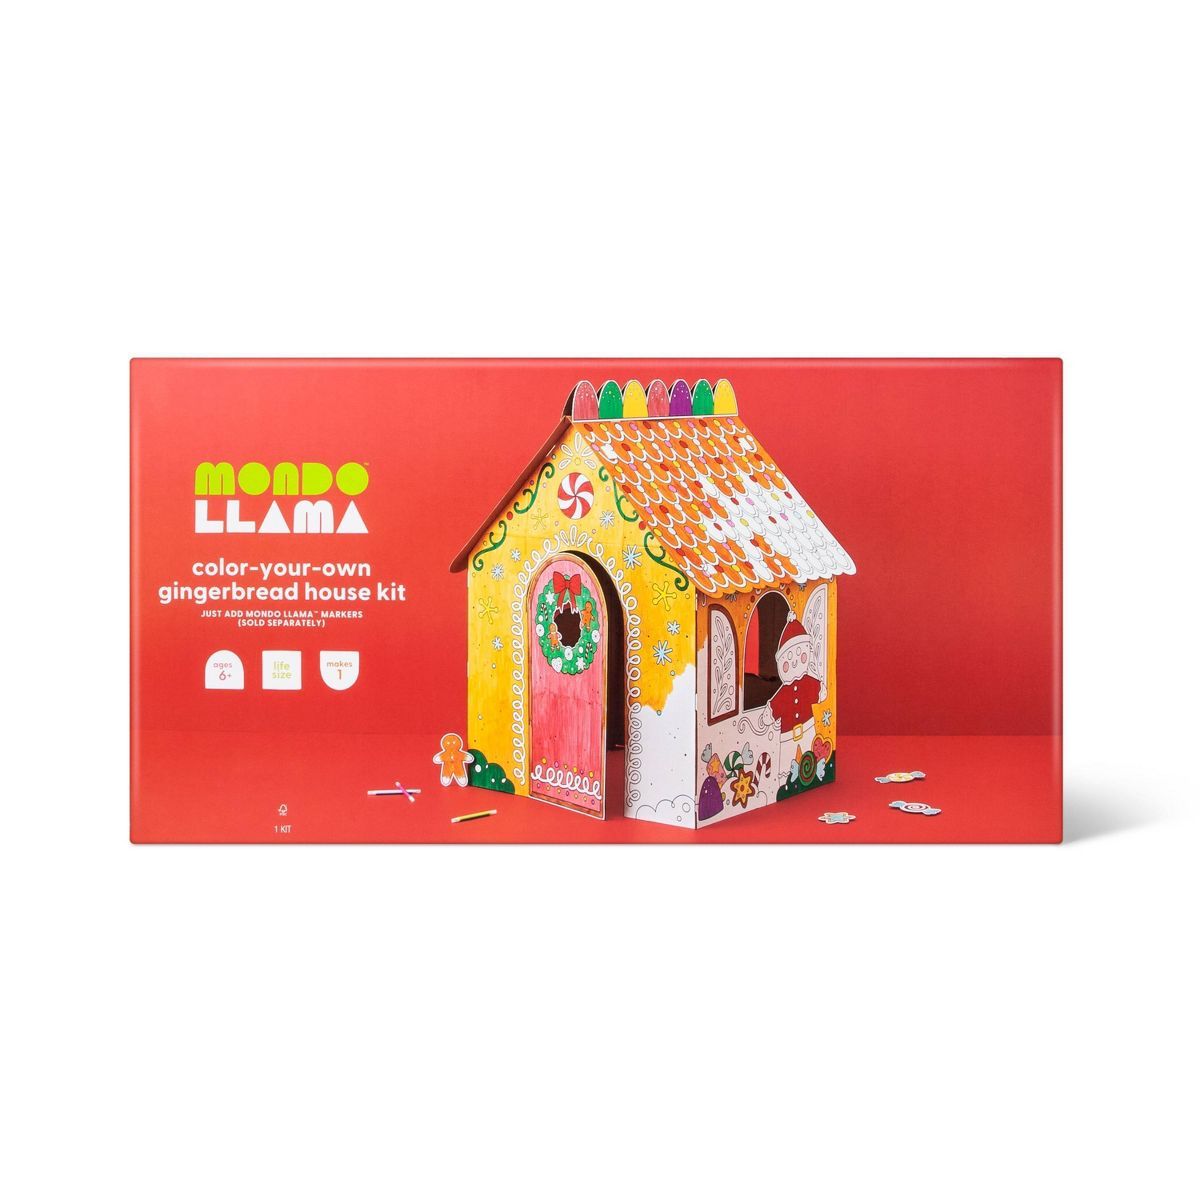 Color-Your-Own Gingerbread House Kit - Mondo Llama™ | Target